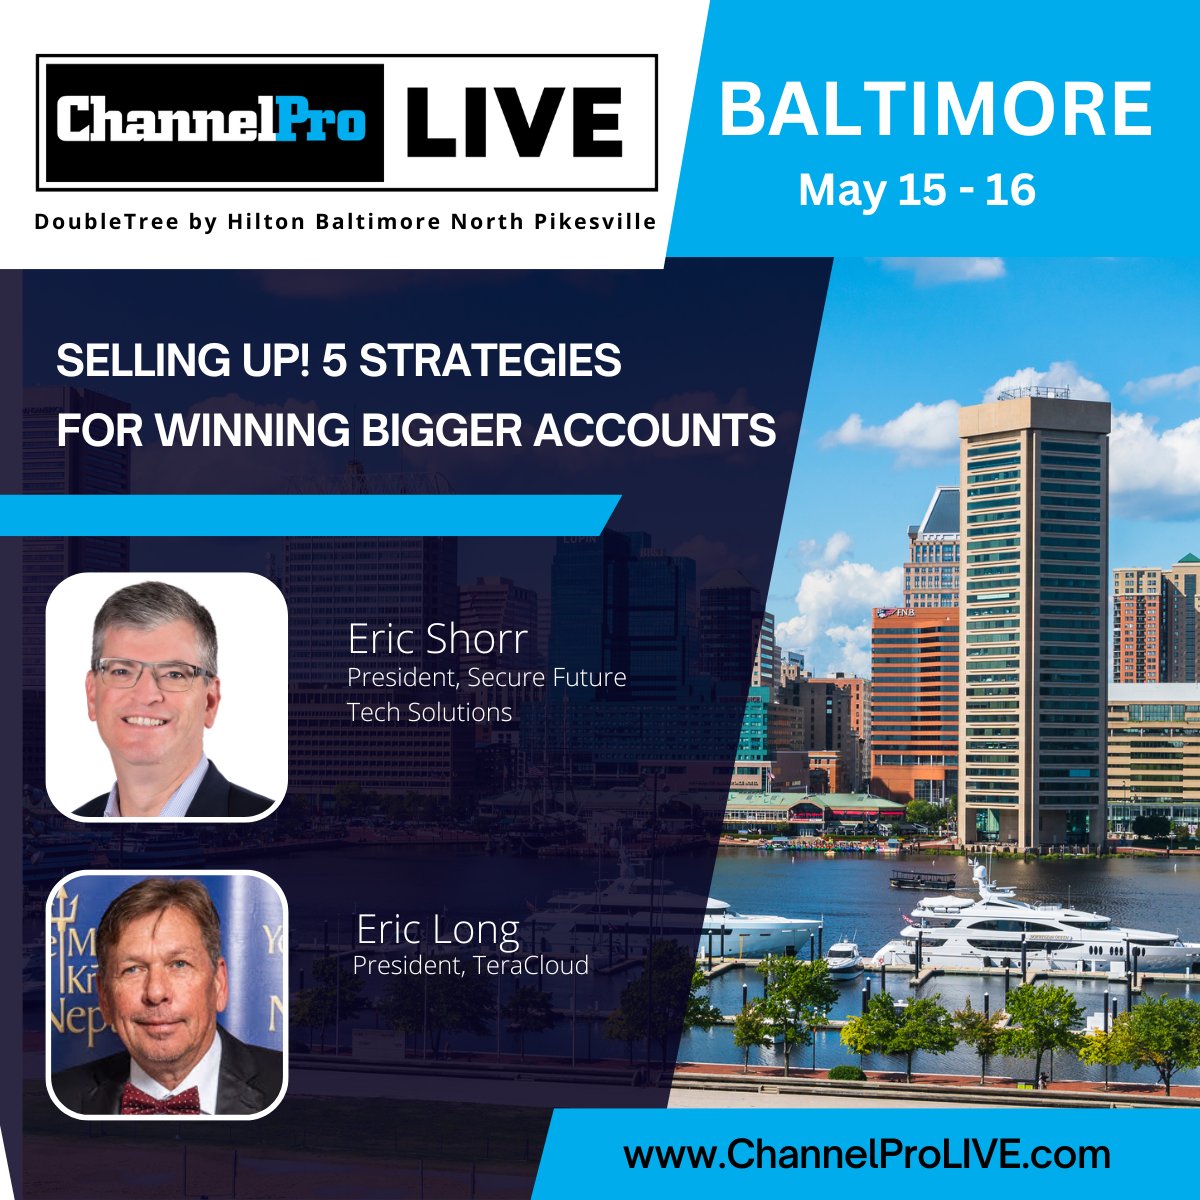 At #ChannelProLiveBaltimore, MSPs can master the #ArtOfSelling to 50+ seat accounts. Register to learn: ✅What mid-size orgs need from IT consultants ✅How to get them to 'yes' ✅ How to retain their business @TeraCloudInc baltimore.channelpronetwork.com